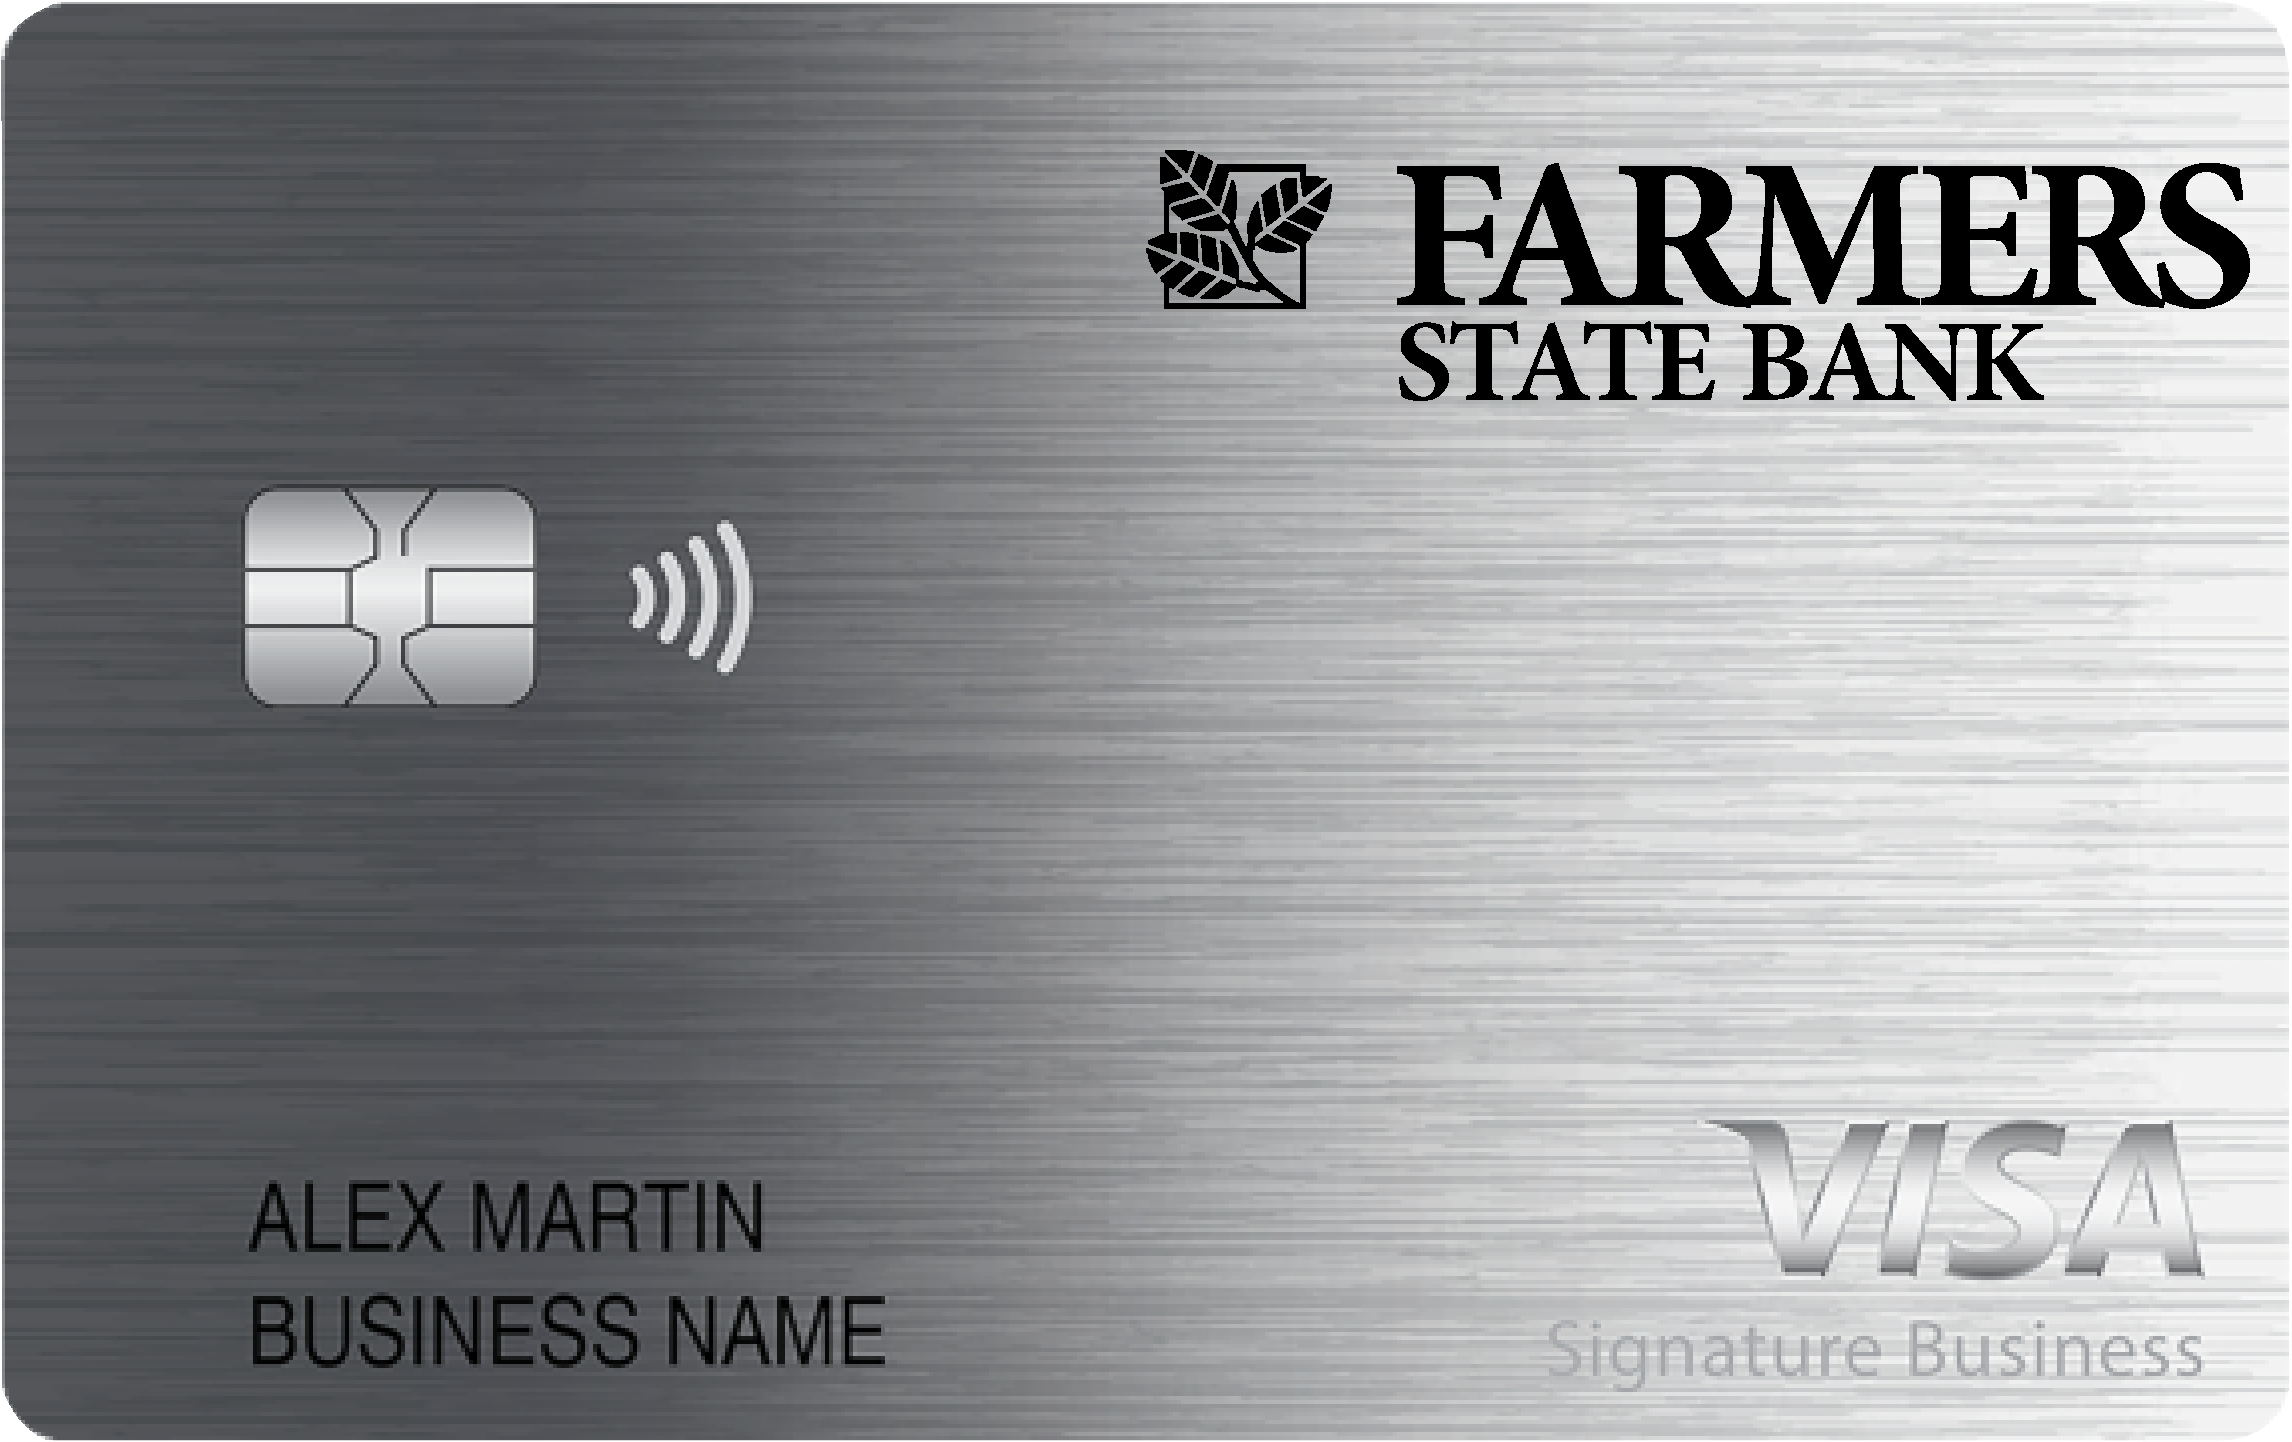 Farmers State Bank of Alto Pass Smart Business Rewards Card